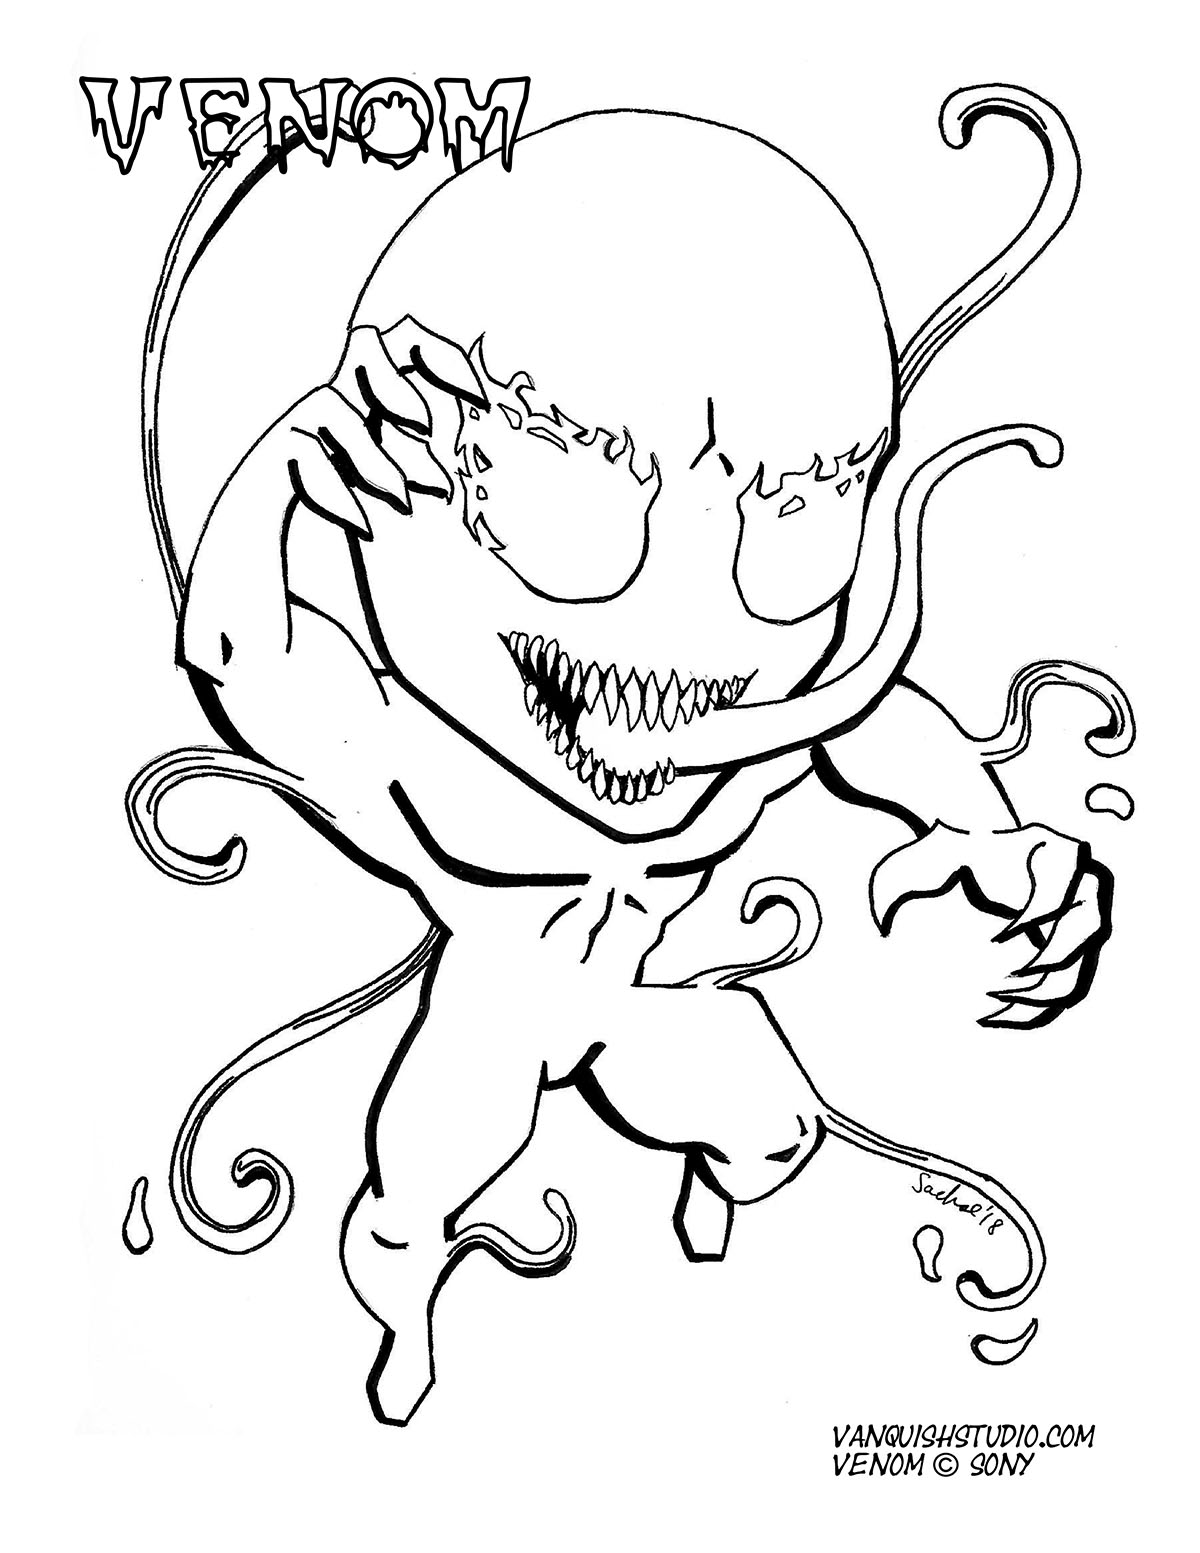 New coloring page release vanquish studio